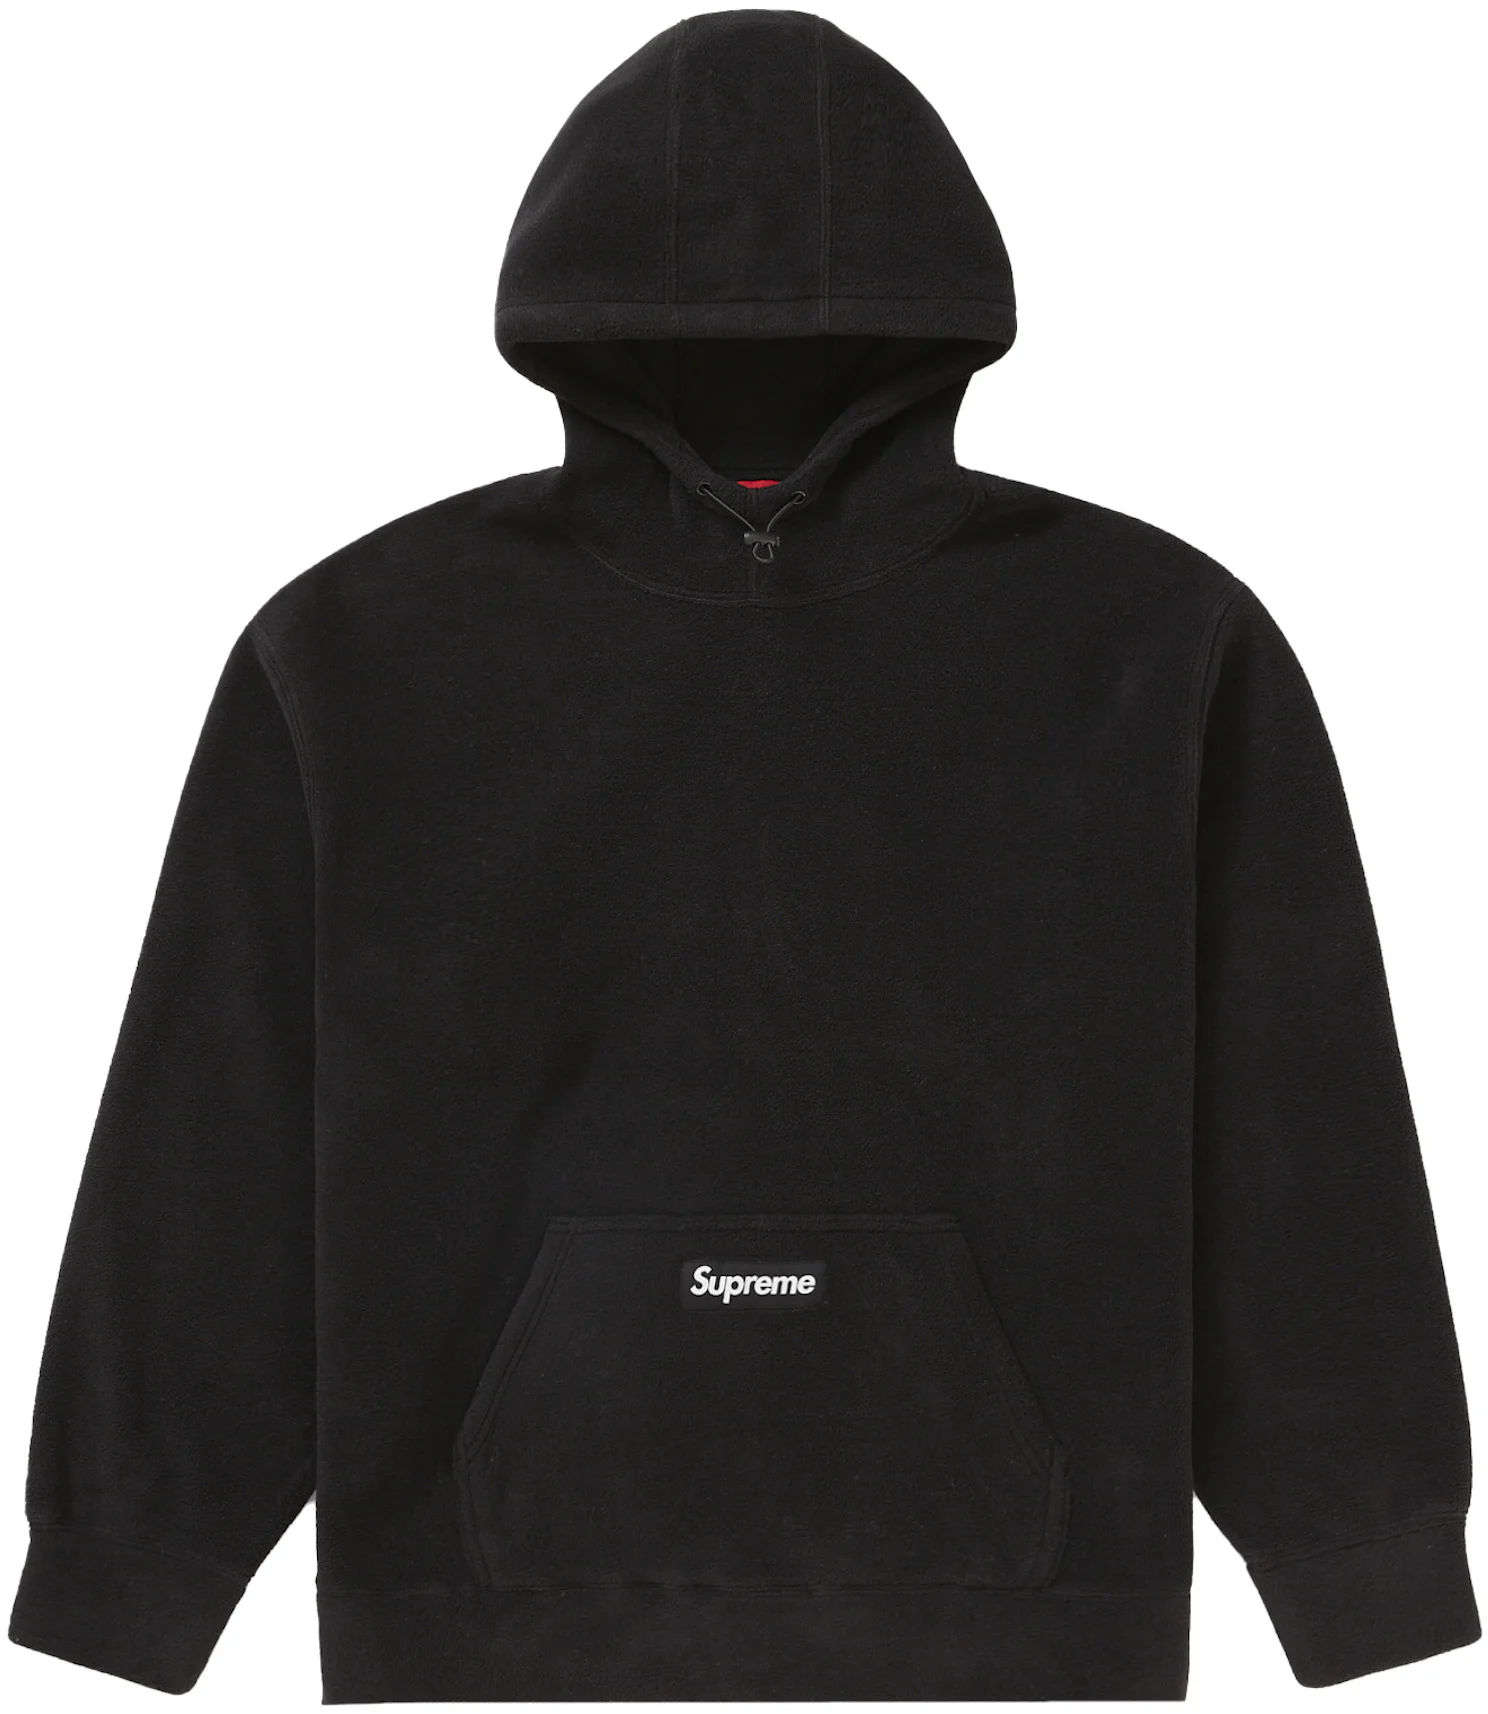 Fear of God Essentials Hoodie: StockX Pick of the Week - StockX News